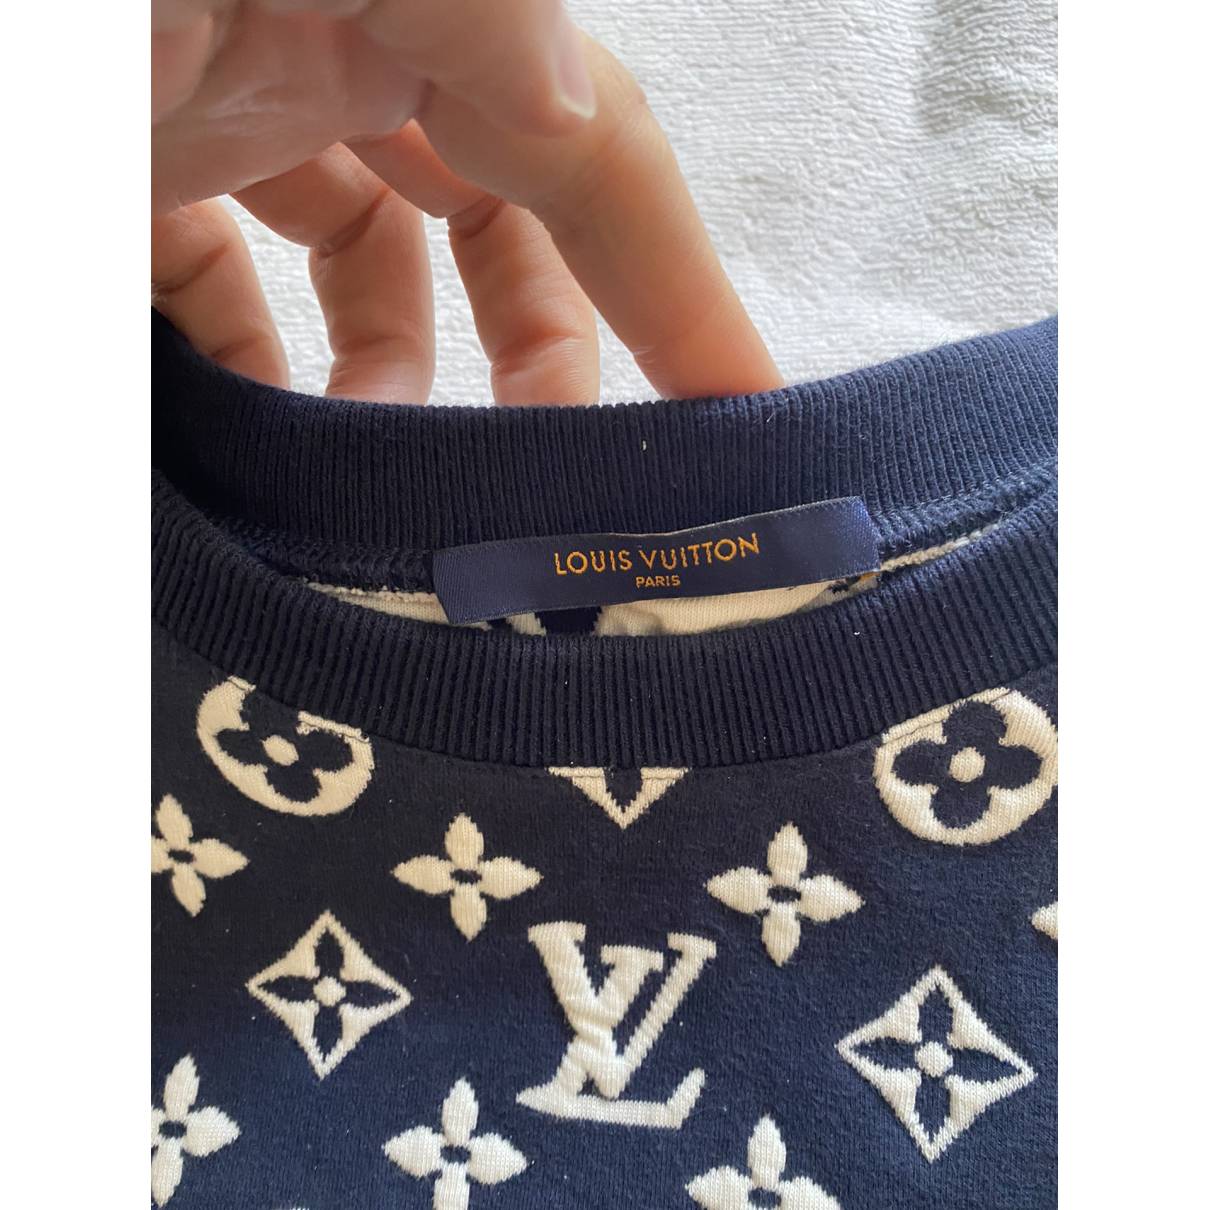 Louis Vuitton - Authenticated Sweatshirt - Cotton Navy for Men, Very Good Condition